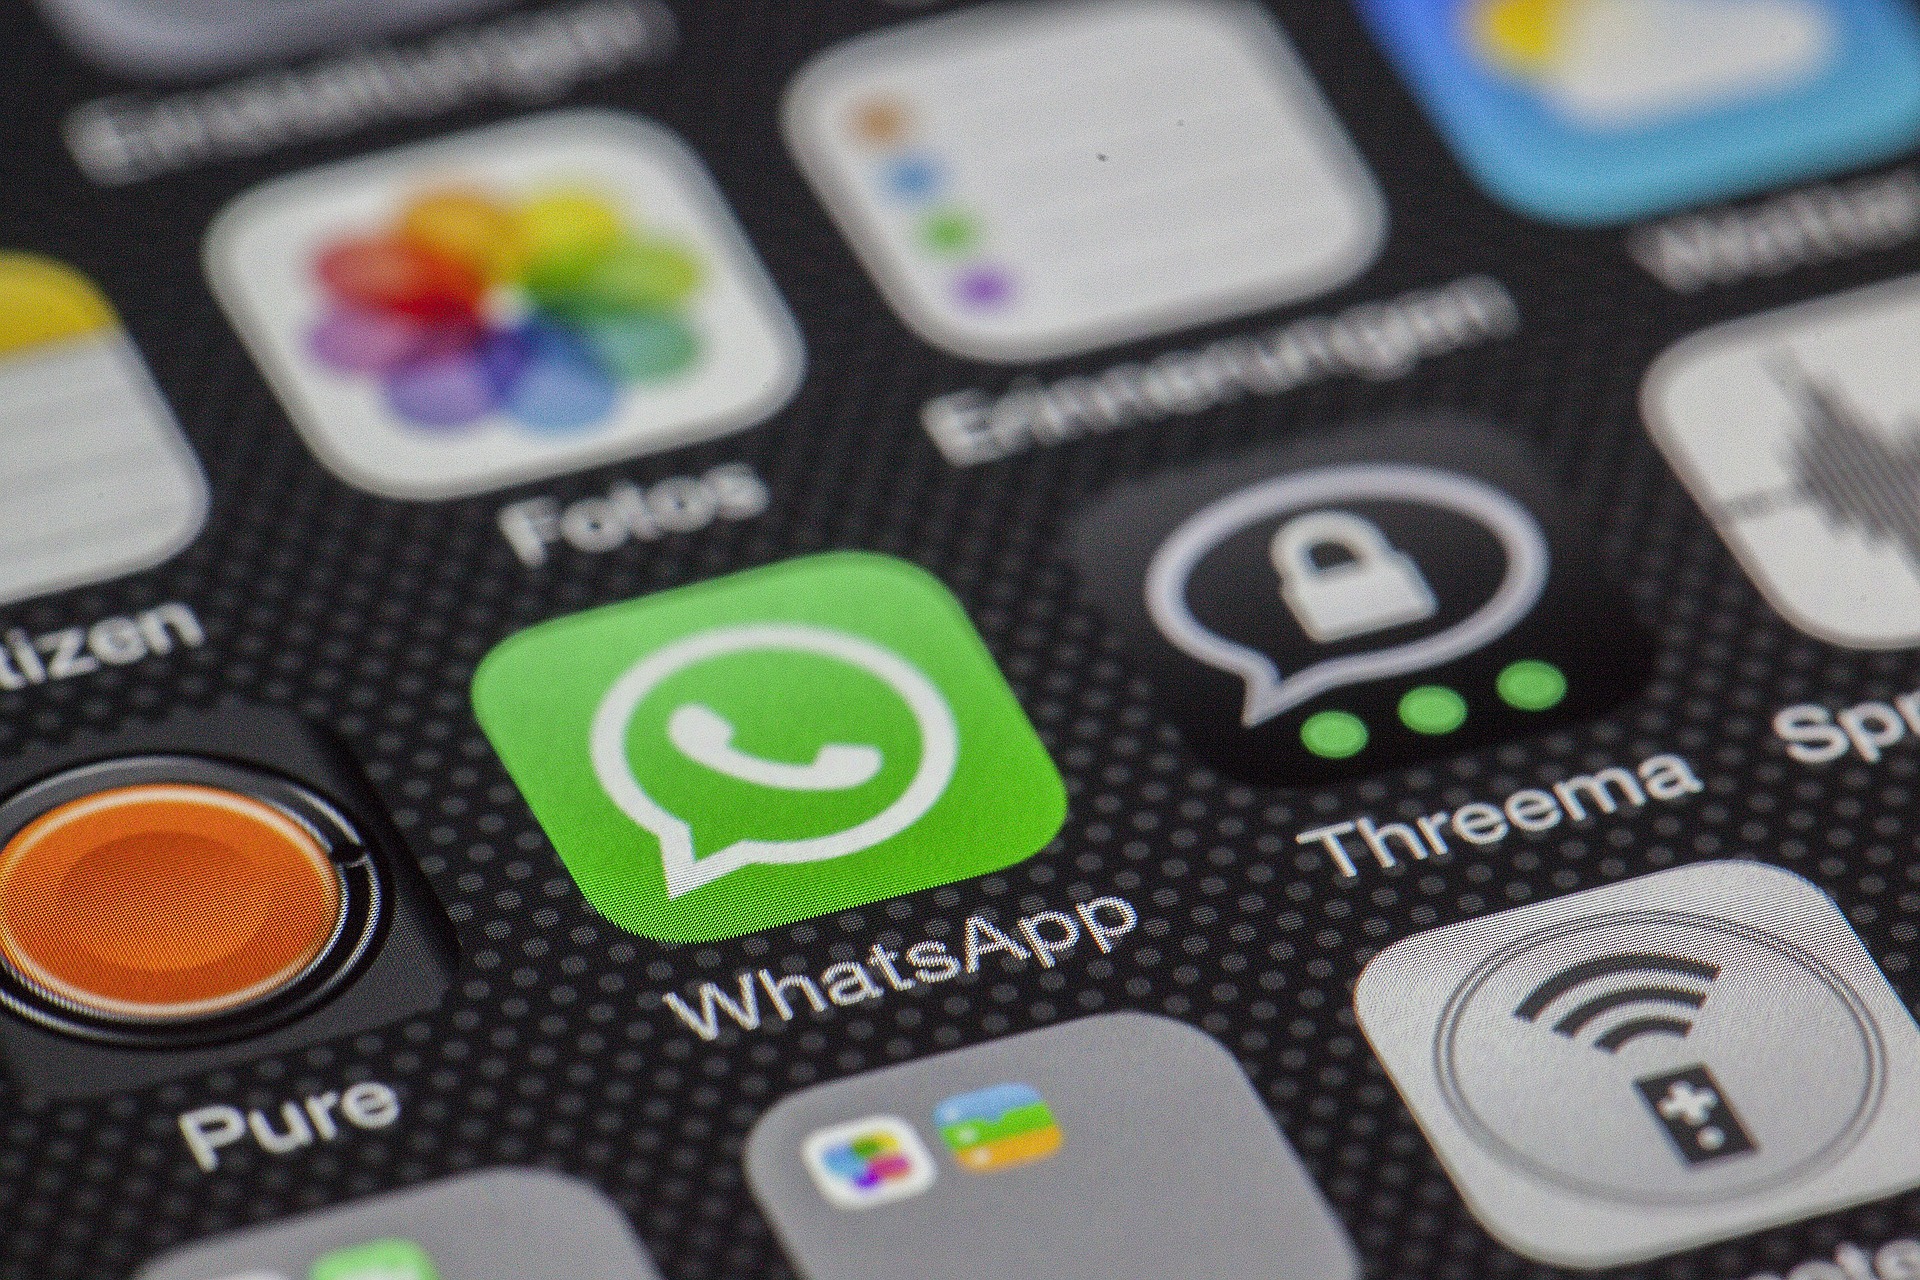 WhatsApp Recorded Over 1.4B Voice/Video Calls on New Year’s Eve